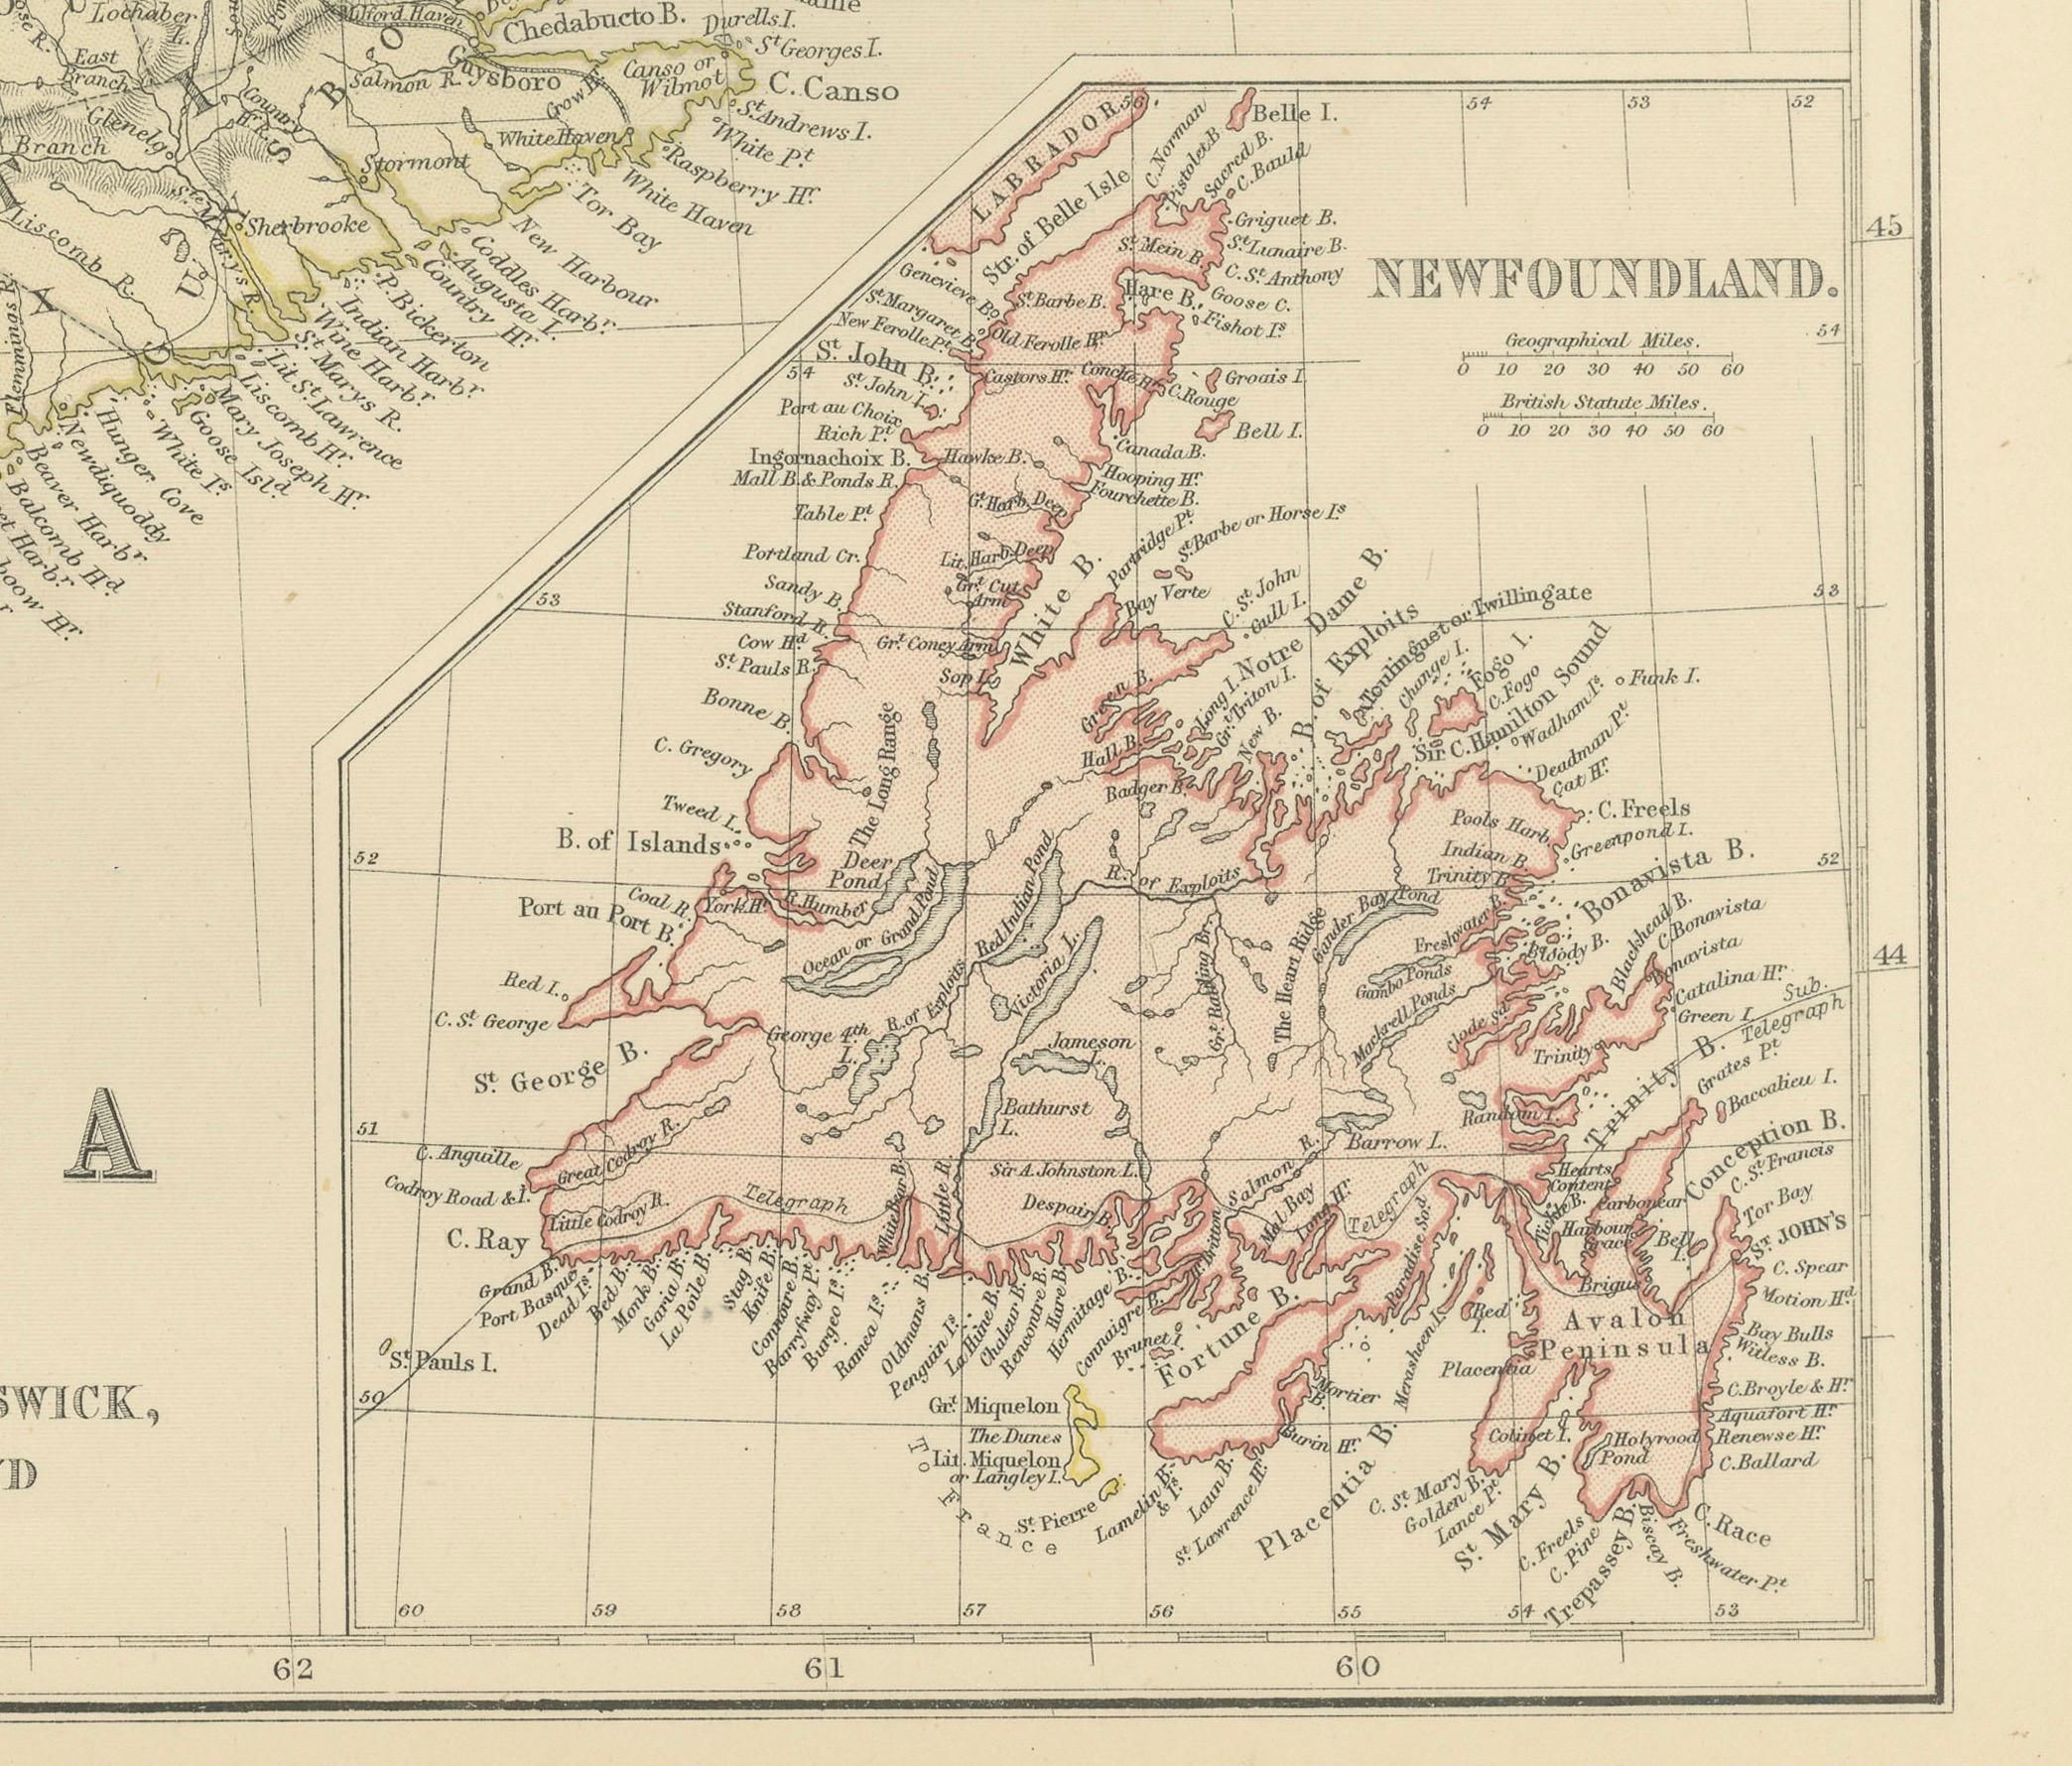 This is a historical map from the 1882 Blackie Atlas, focused on eastern Canada and the maritime provinces. The map is titled 